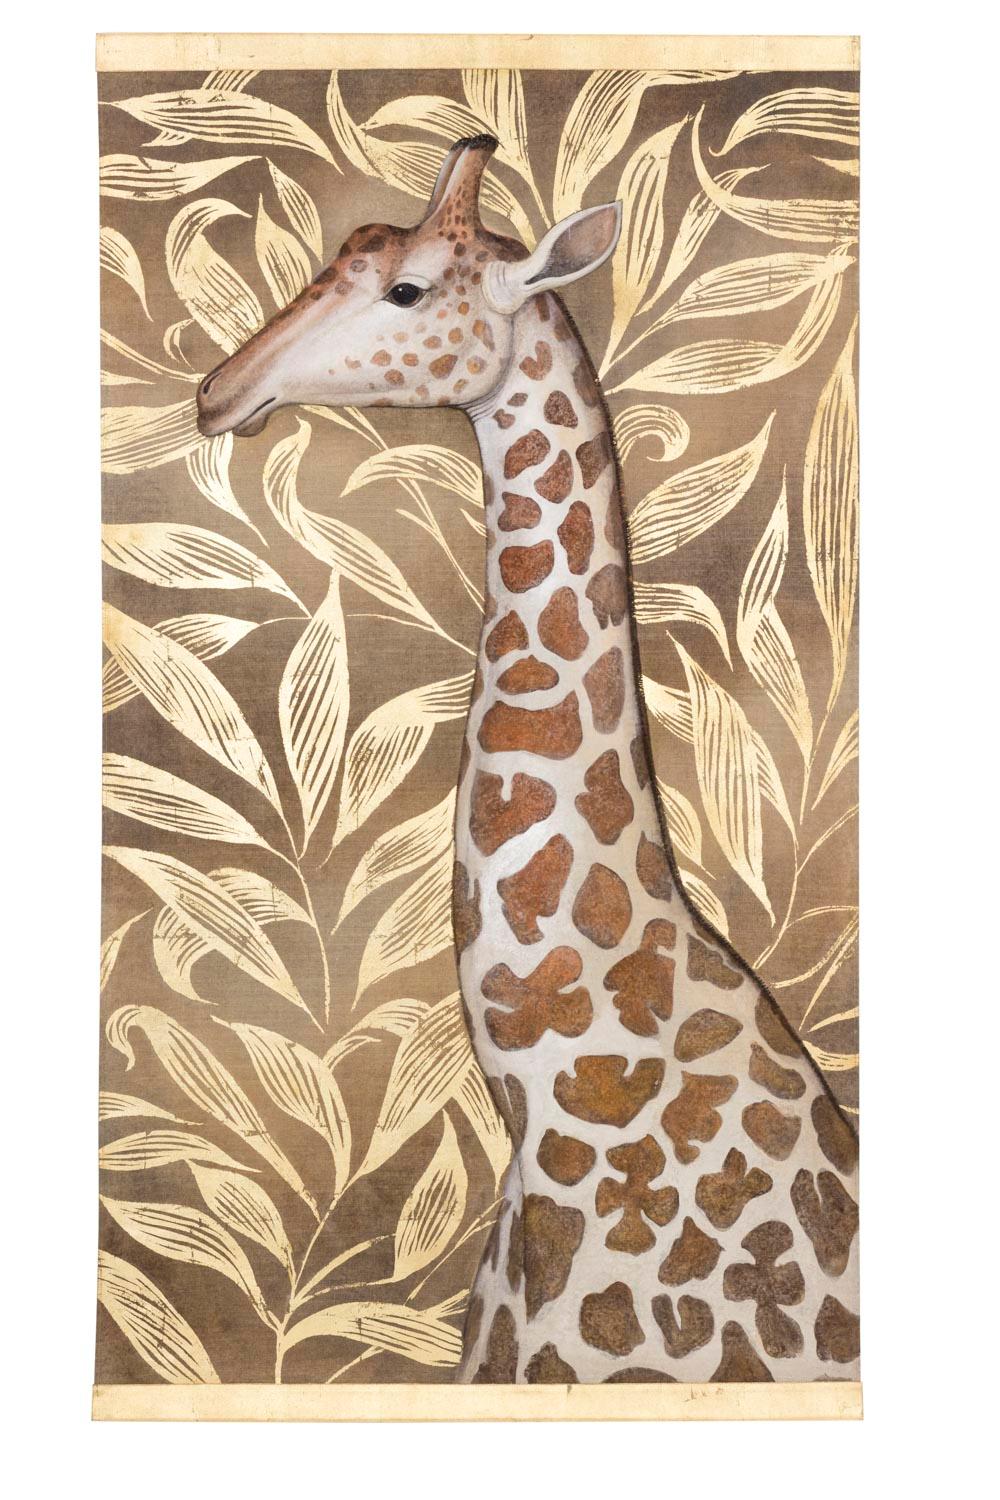 Painted canvas figuring a profile giraffe, centered at its shoulder’s level. Its coat is white with brown spots.
Brown background with gilt interwoven leaves.

Linen raw canvas hand painted with natural pigments and background gilt with copper